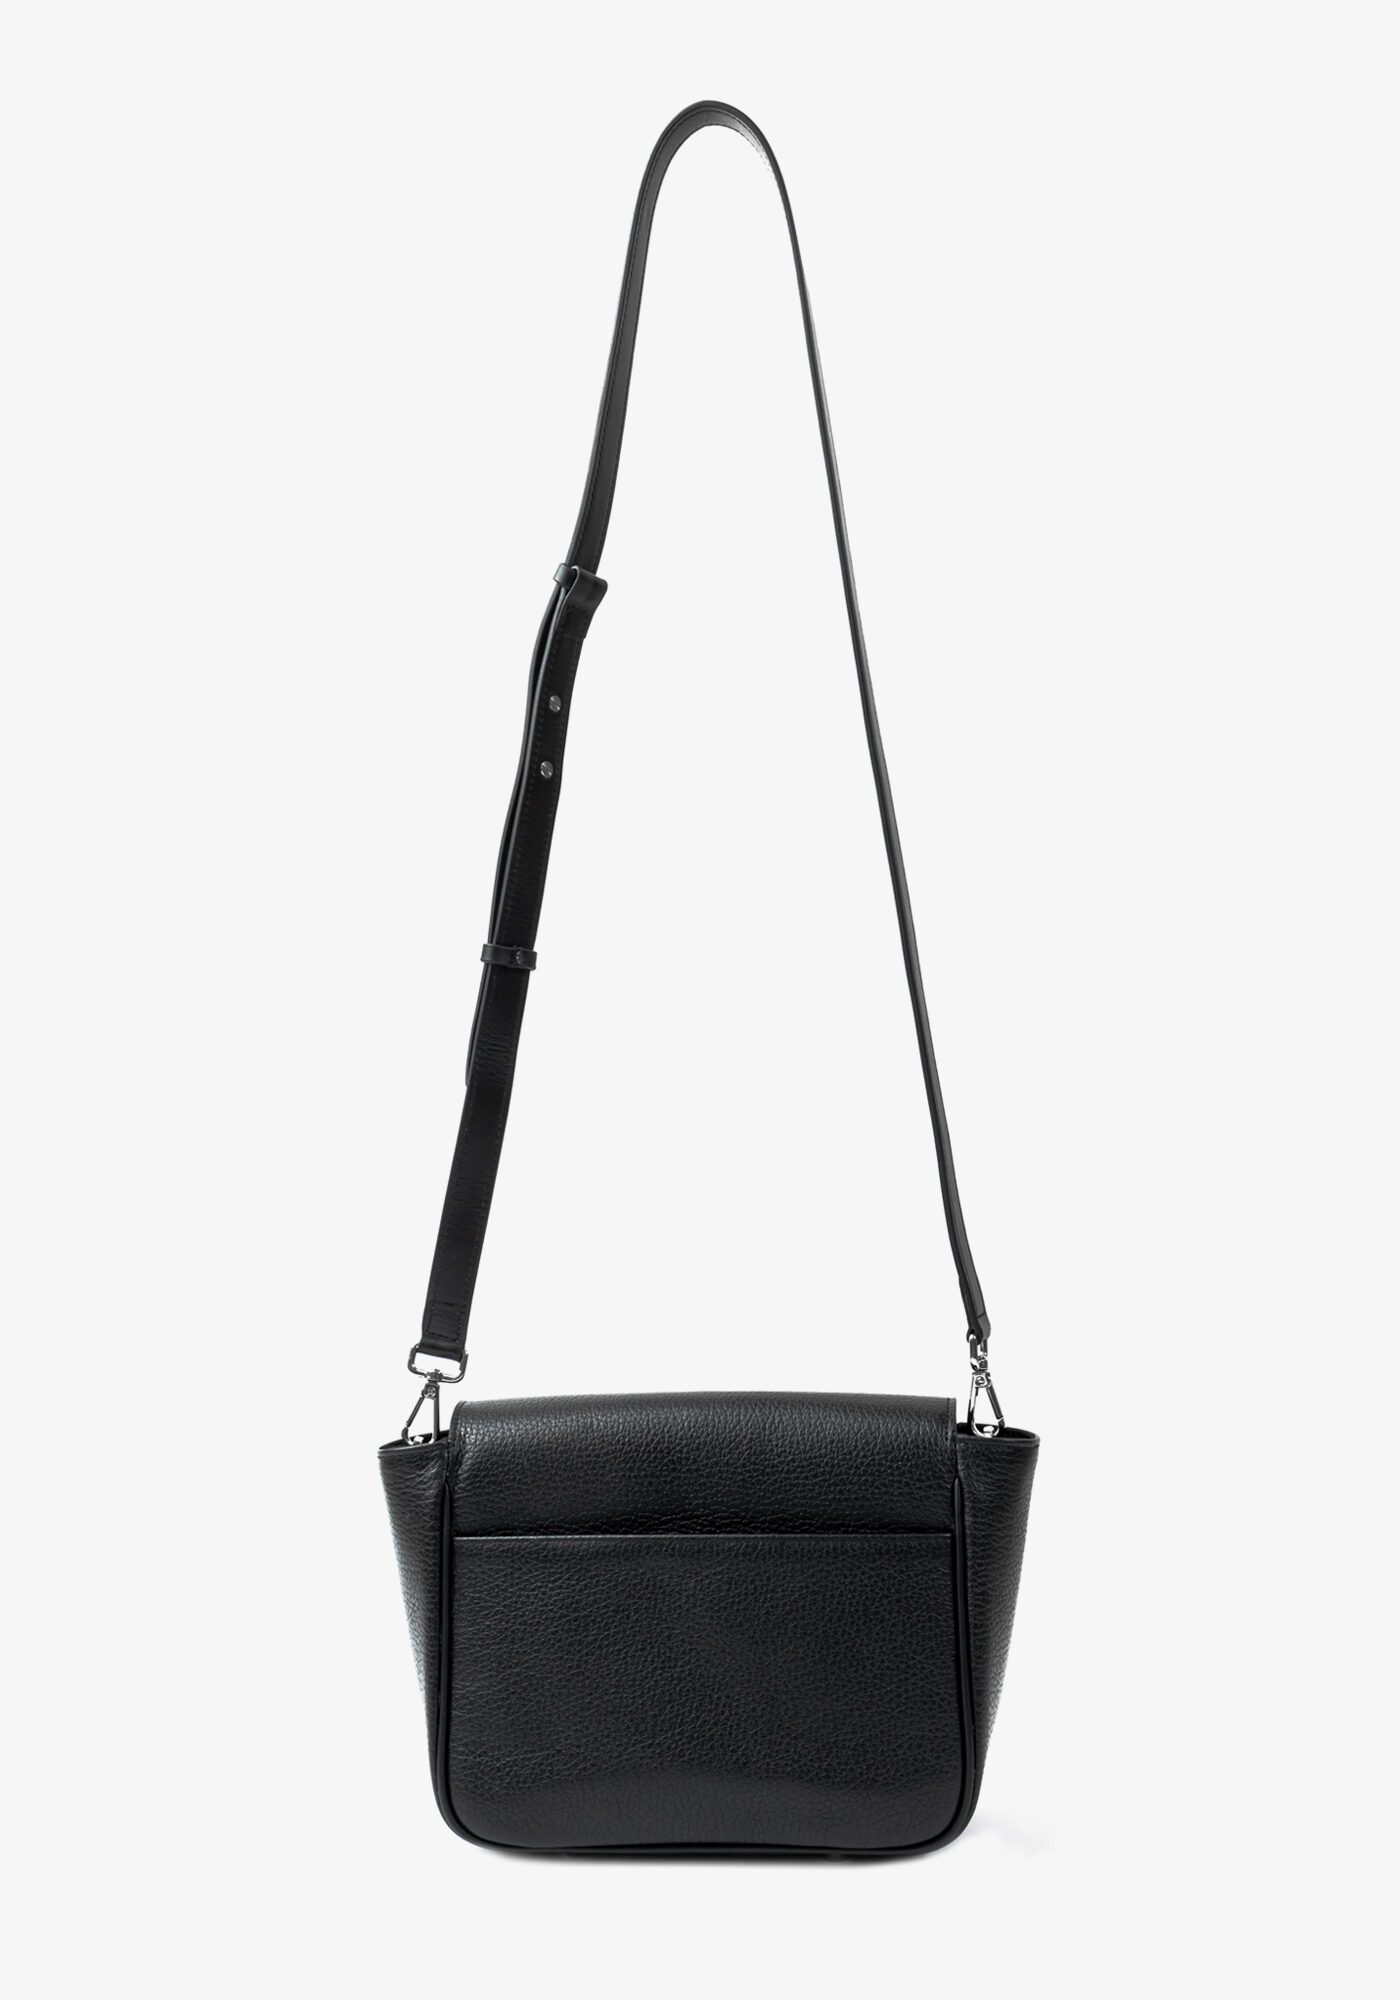 Olivia Charcoal Leather Crossbody bag - Marroque TH Official Site ...